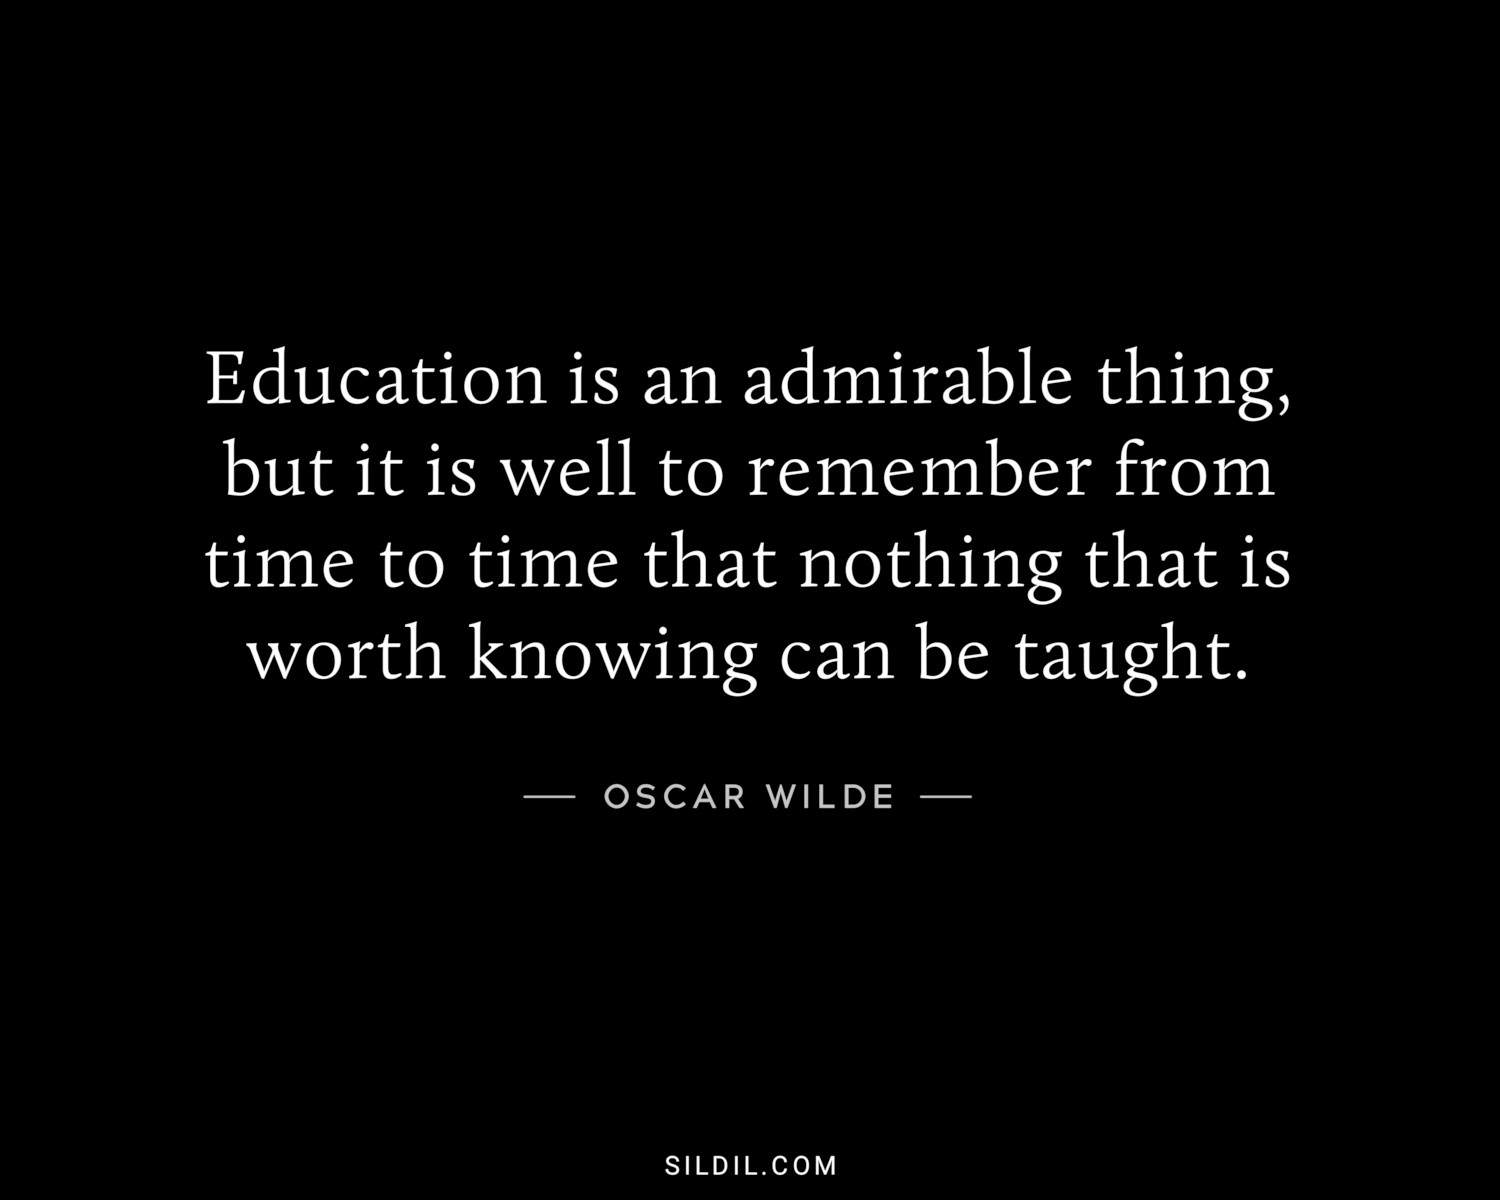 Education is an admirable thing, but it is well to remember from time to time that nothing that is worth knowing can be taught.